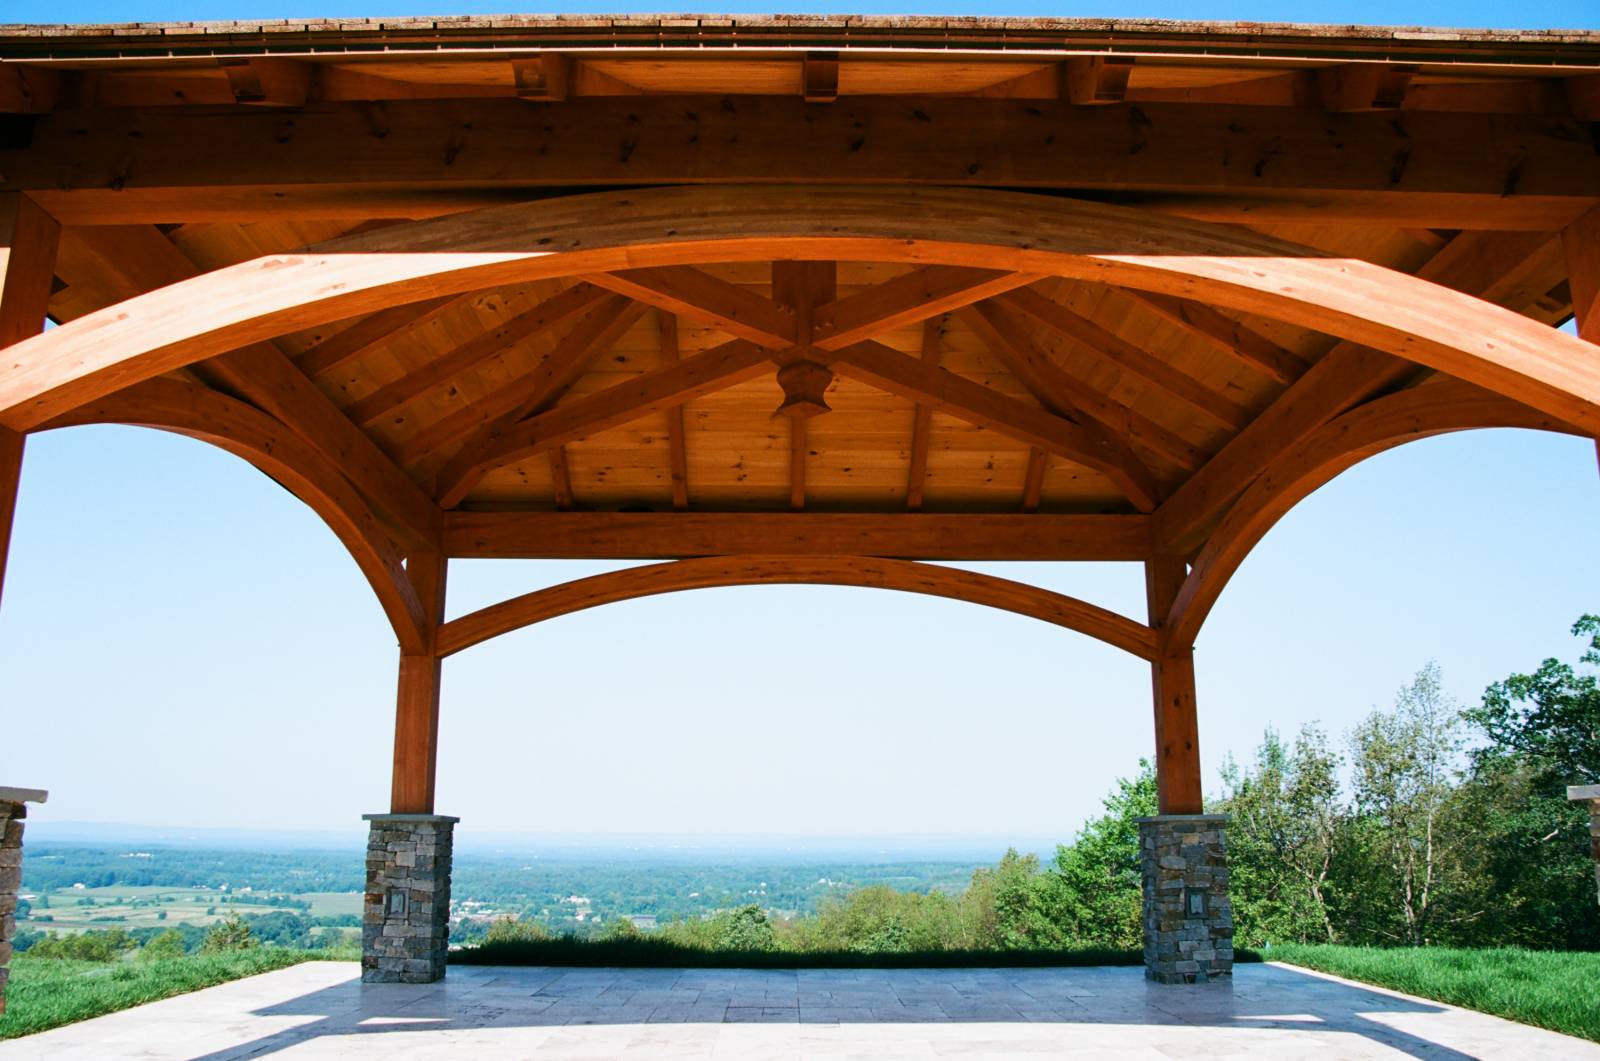 Arched Glulam Beams in Spacious Pavilion